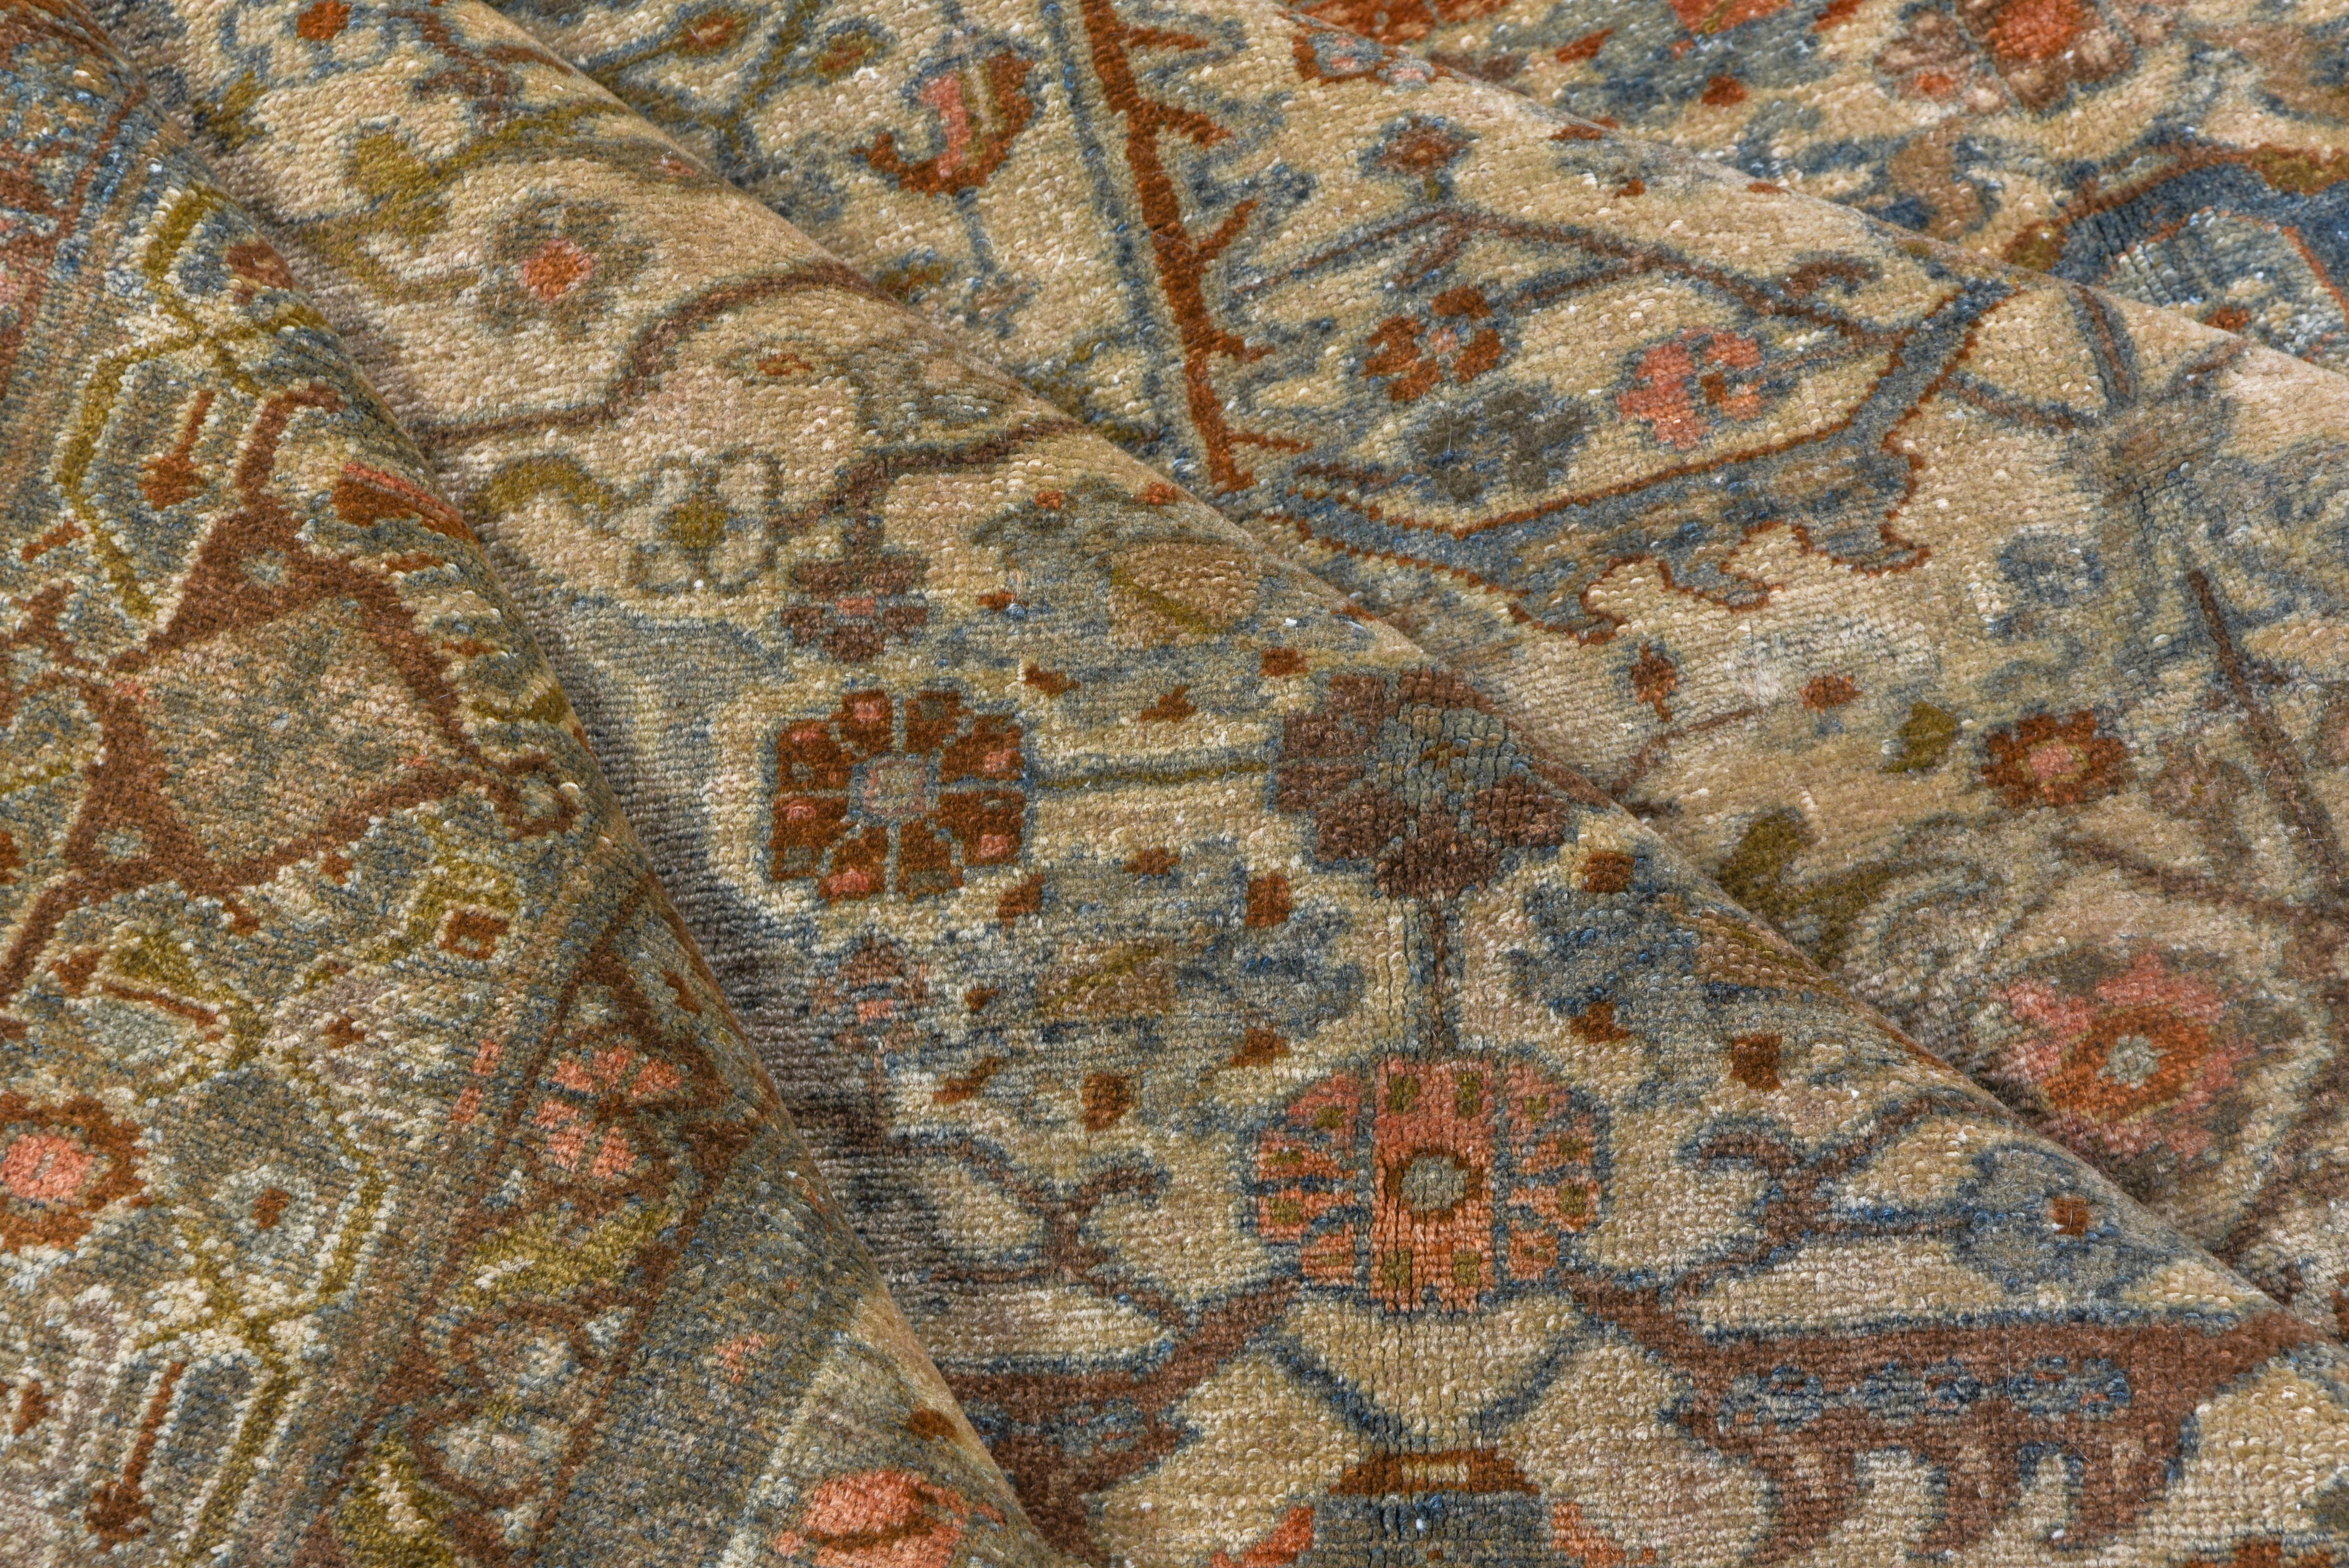 Serrated leaves, vinery lozenges and hexagons, rough small palmettes and lots of floral infill decorate the ecru field of this west Persian rustic carpet .A medium blue border shows a reversing turtle palmette design and rust accents are everywhere.